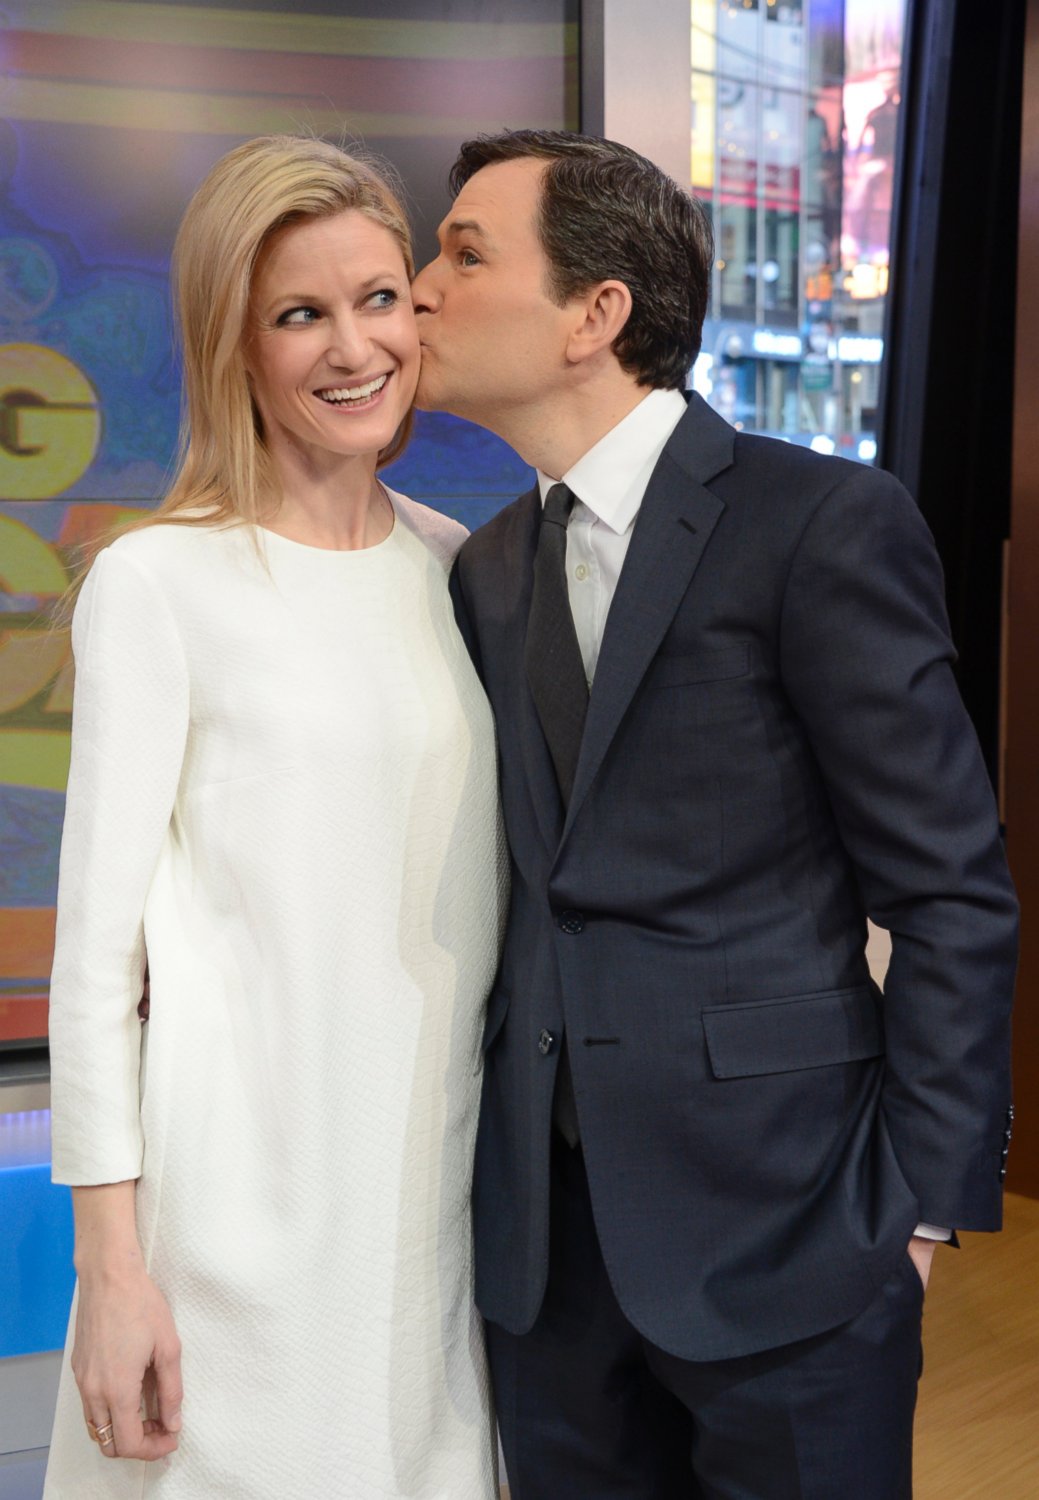 PHOTO: Dan Harris and his wife Bianca wait backstage on the set of "Good Morning America" on March 11, 2014 in New York City.